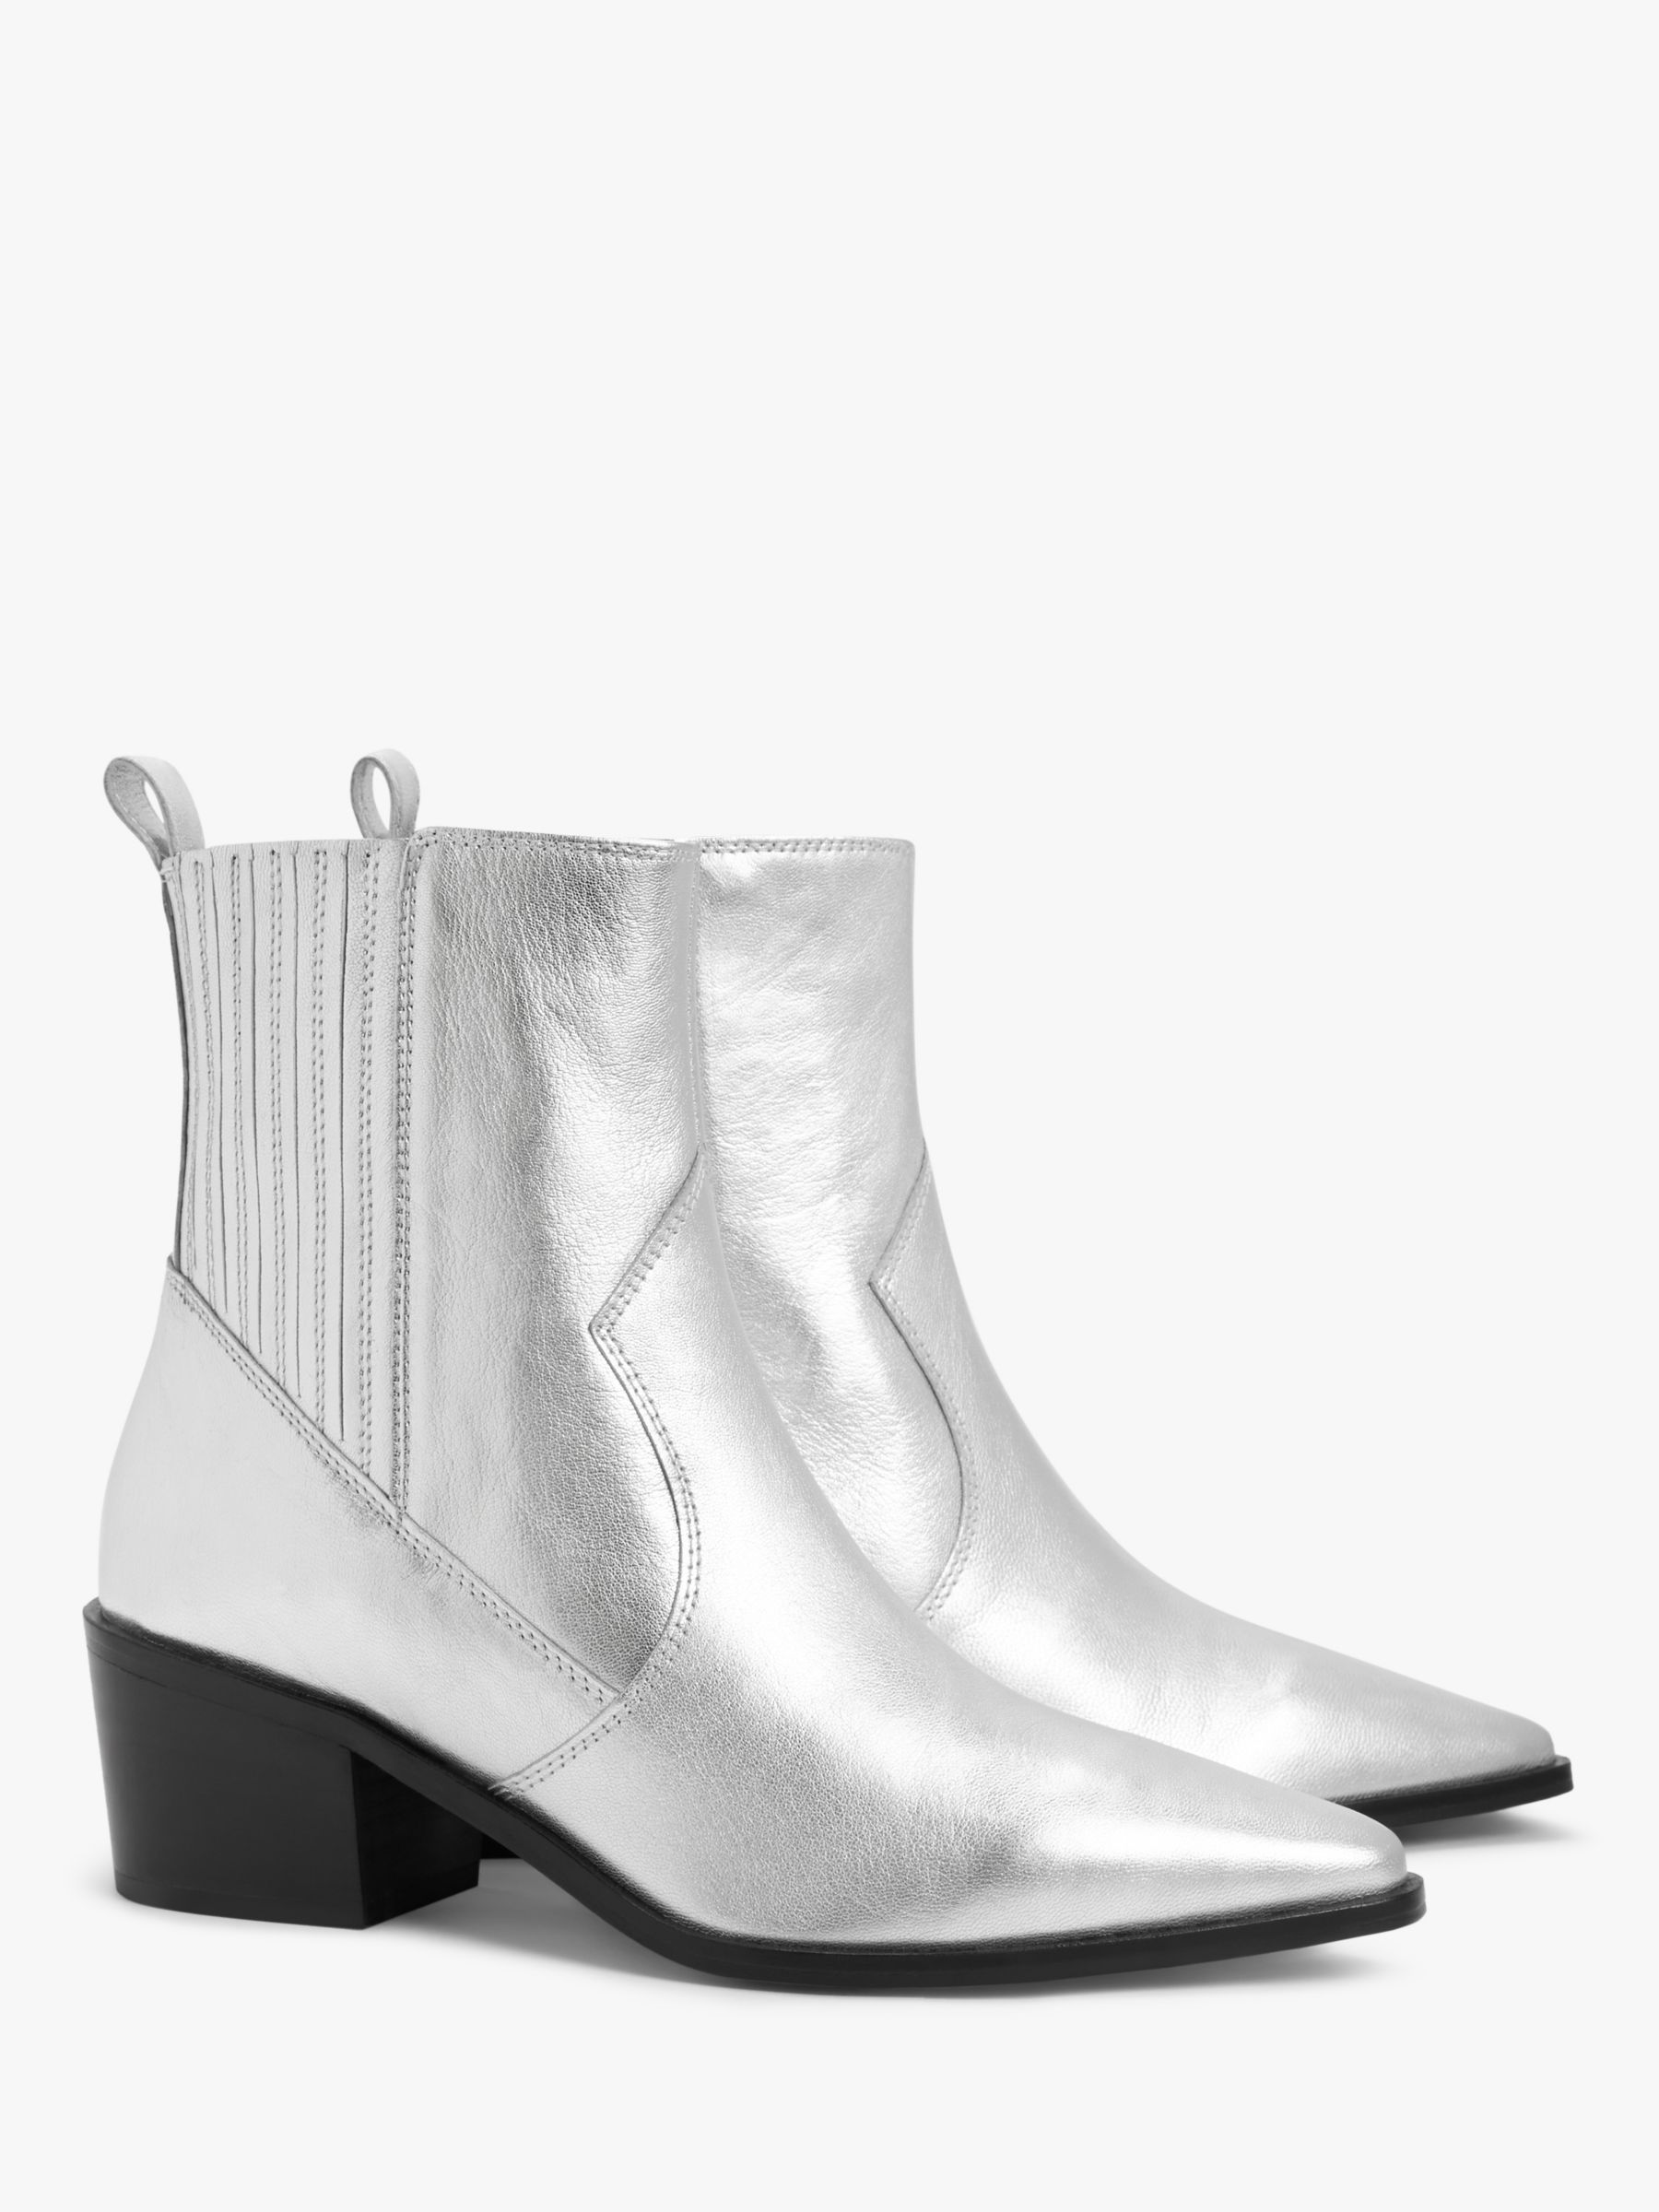 AND/OR Pixie Leather Heeled Chelsea Western Boots, Silver Foil Cow at ...